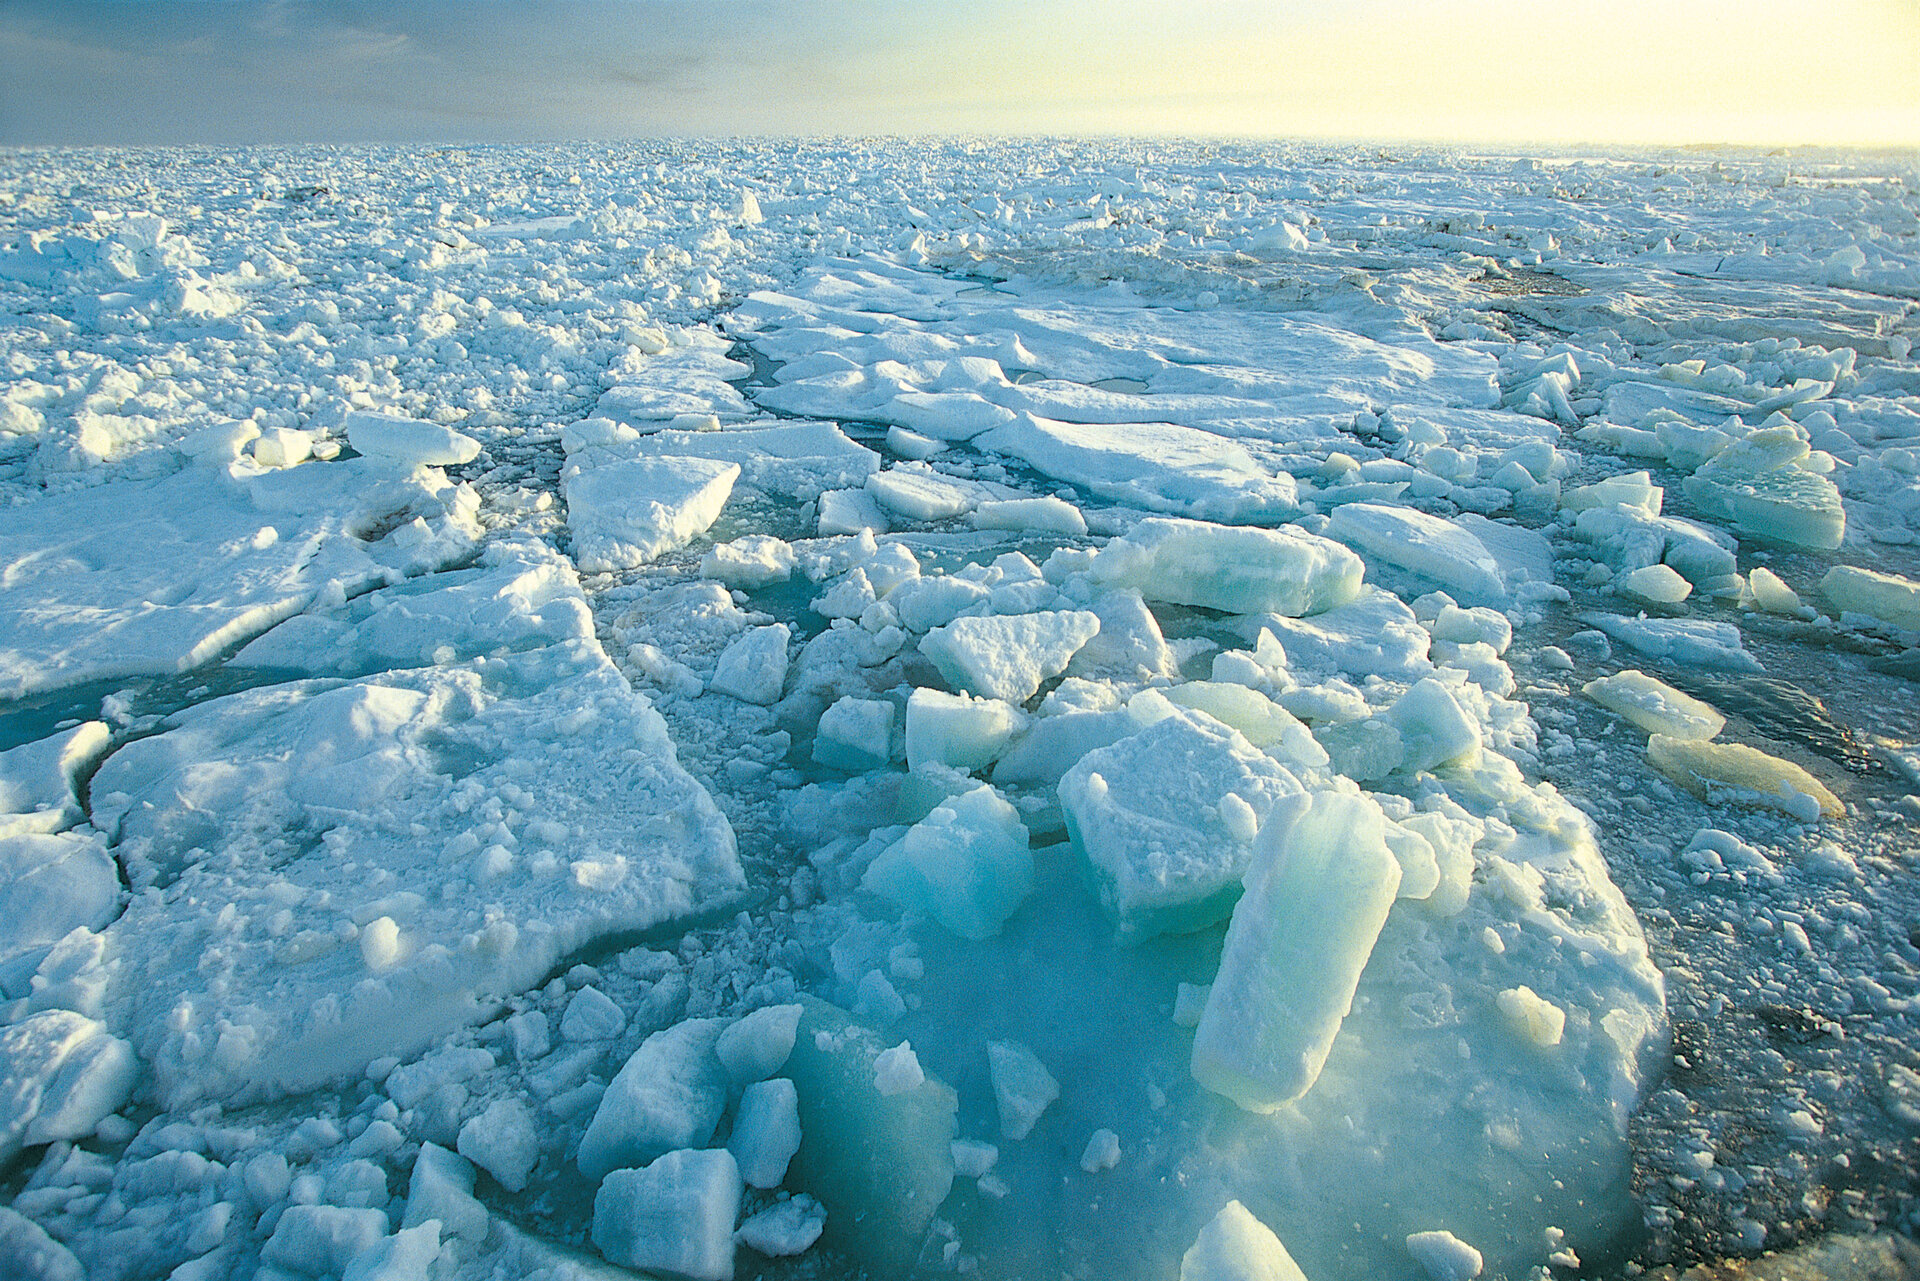 Ice plays a crucial role in regulating climate